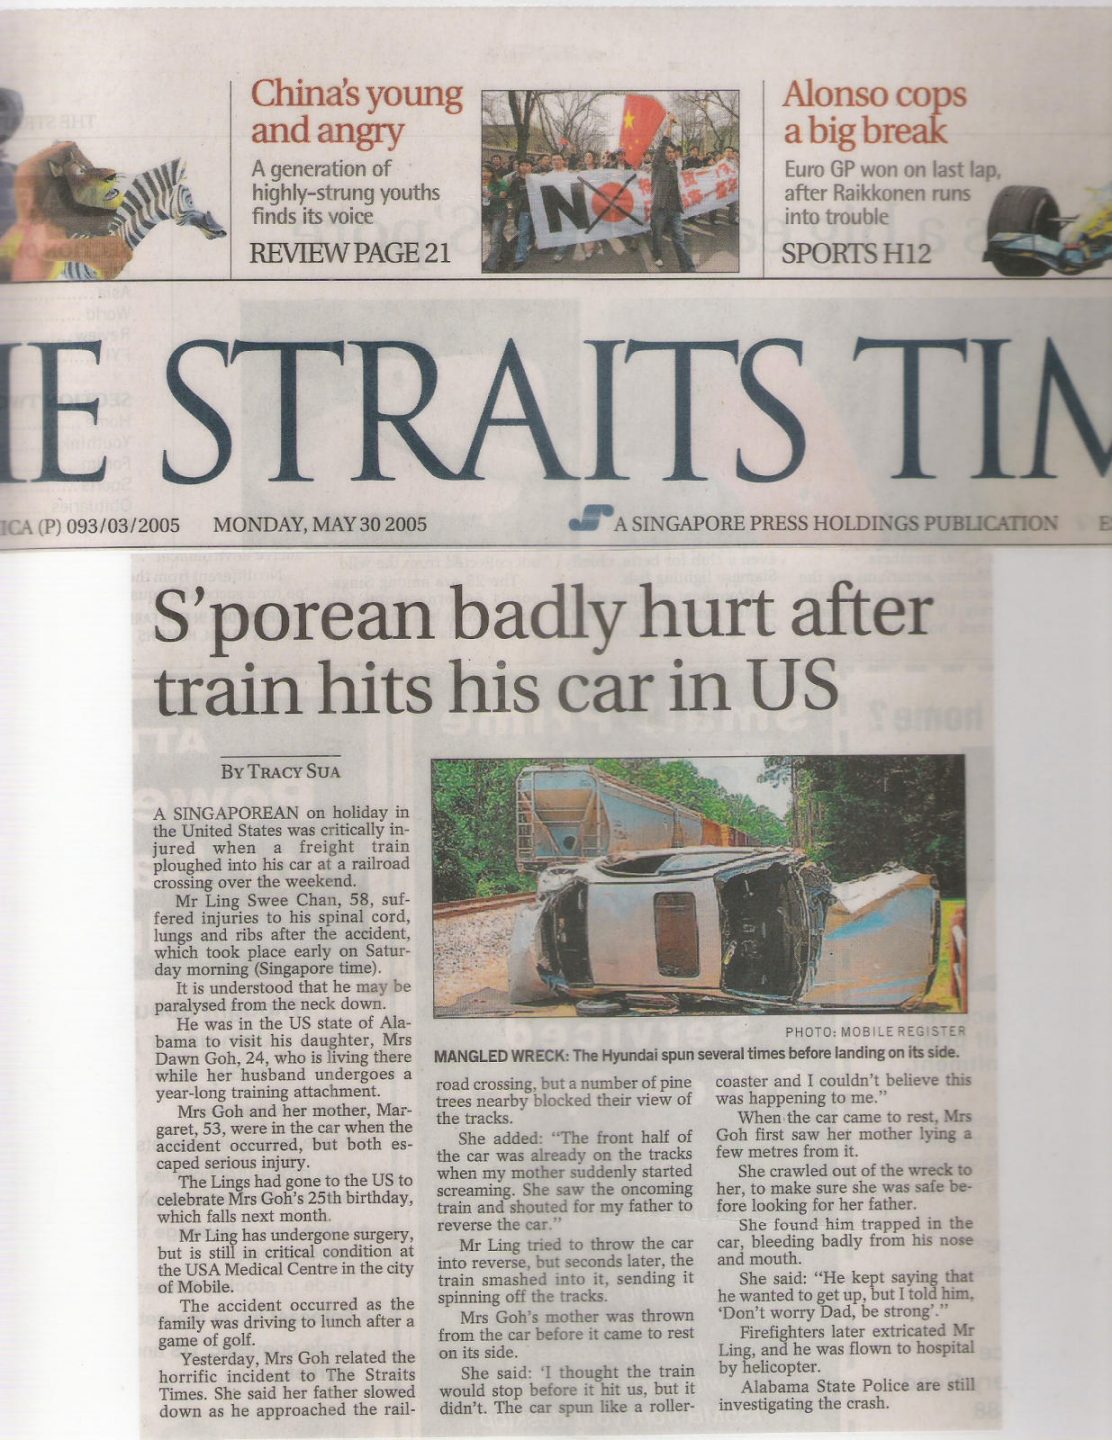 The bad accident made local headlines in Singapore. Photo courtesy of Ling Kin Lew.